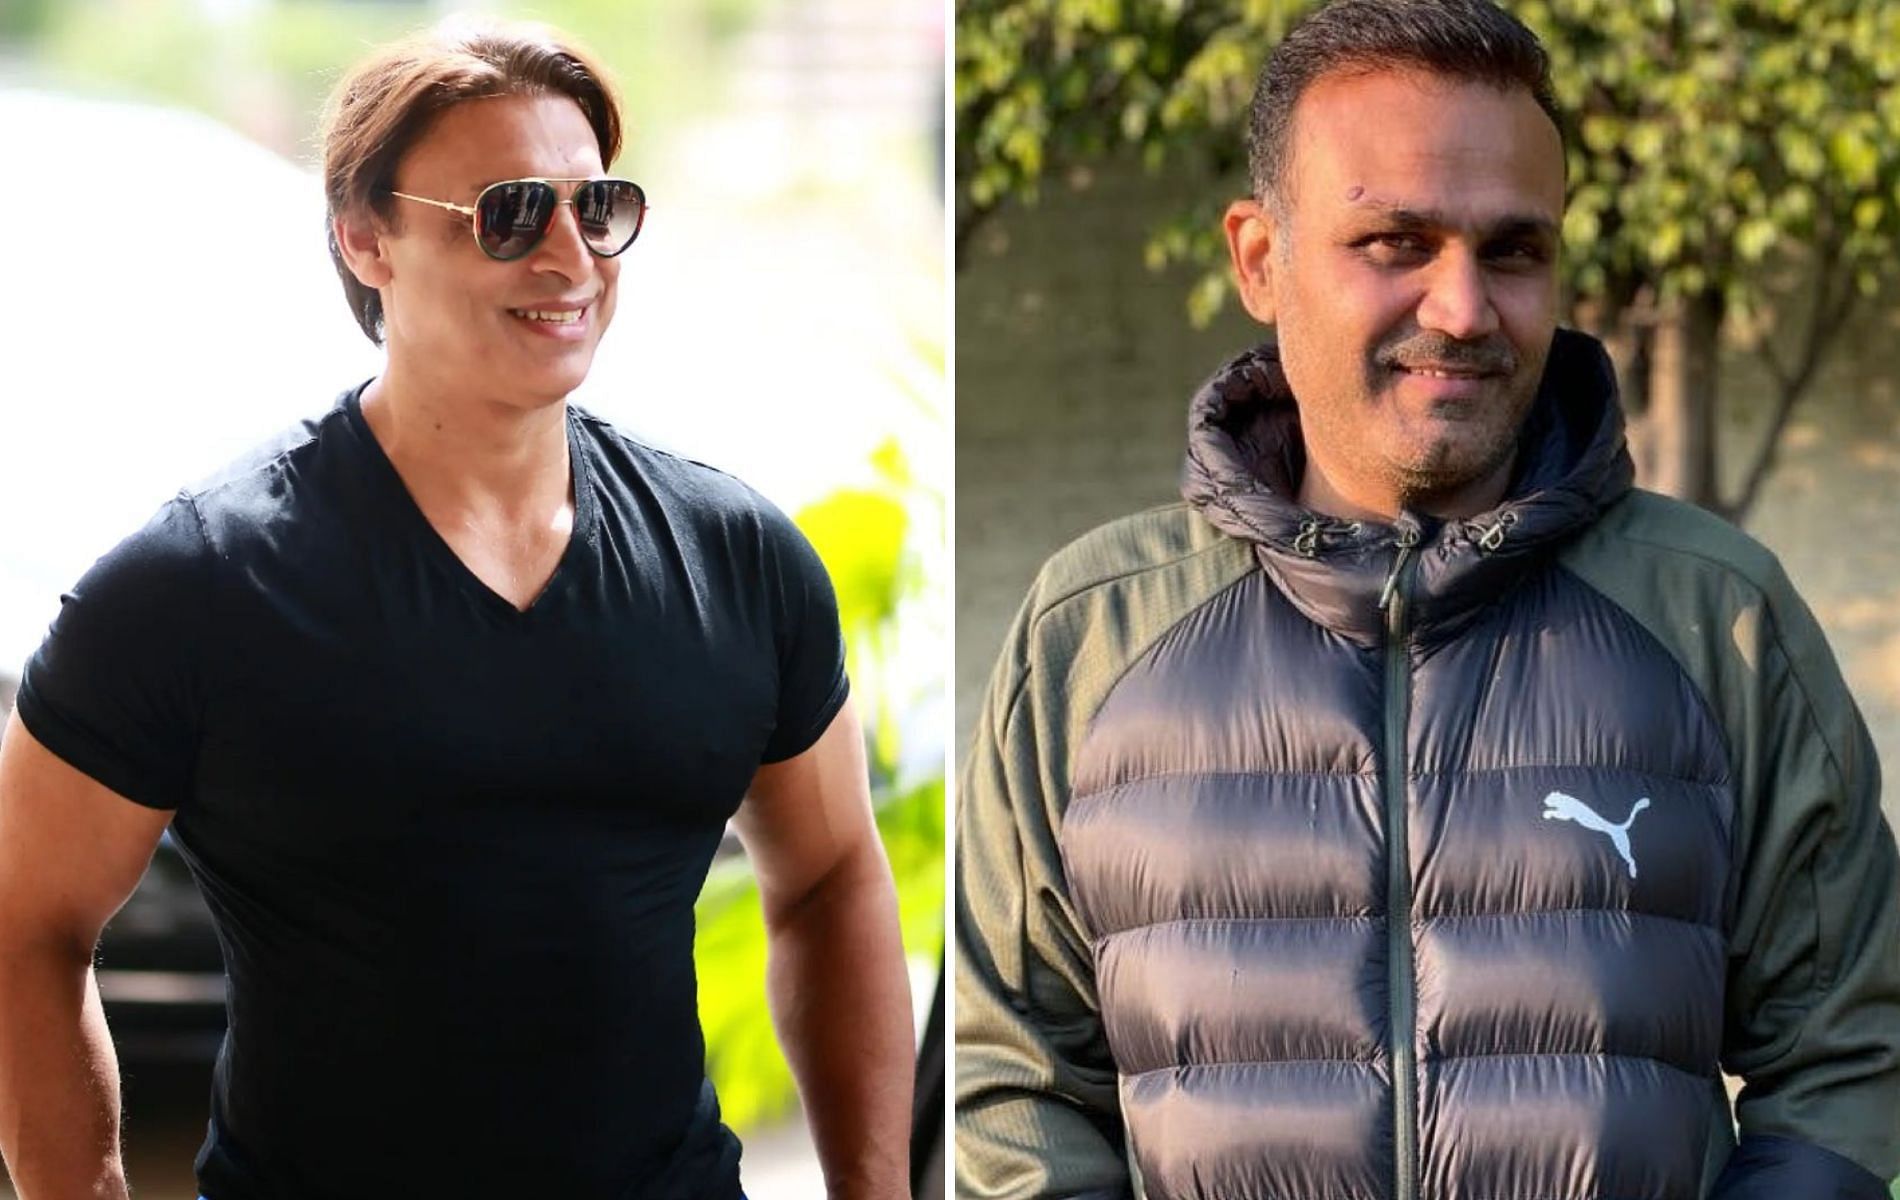 Shoaib Akhtar (L) and Virender Sehwag (R). (Pics: Instagram)